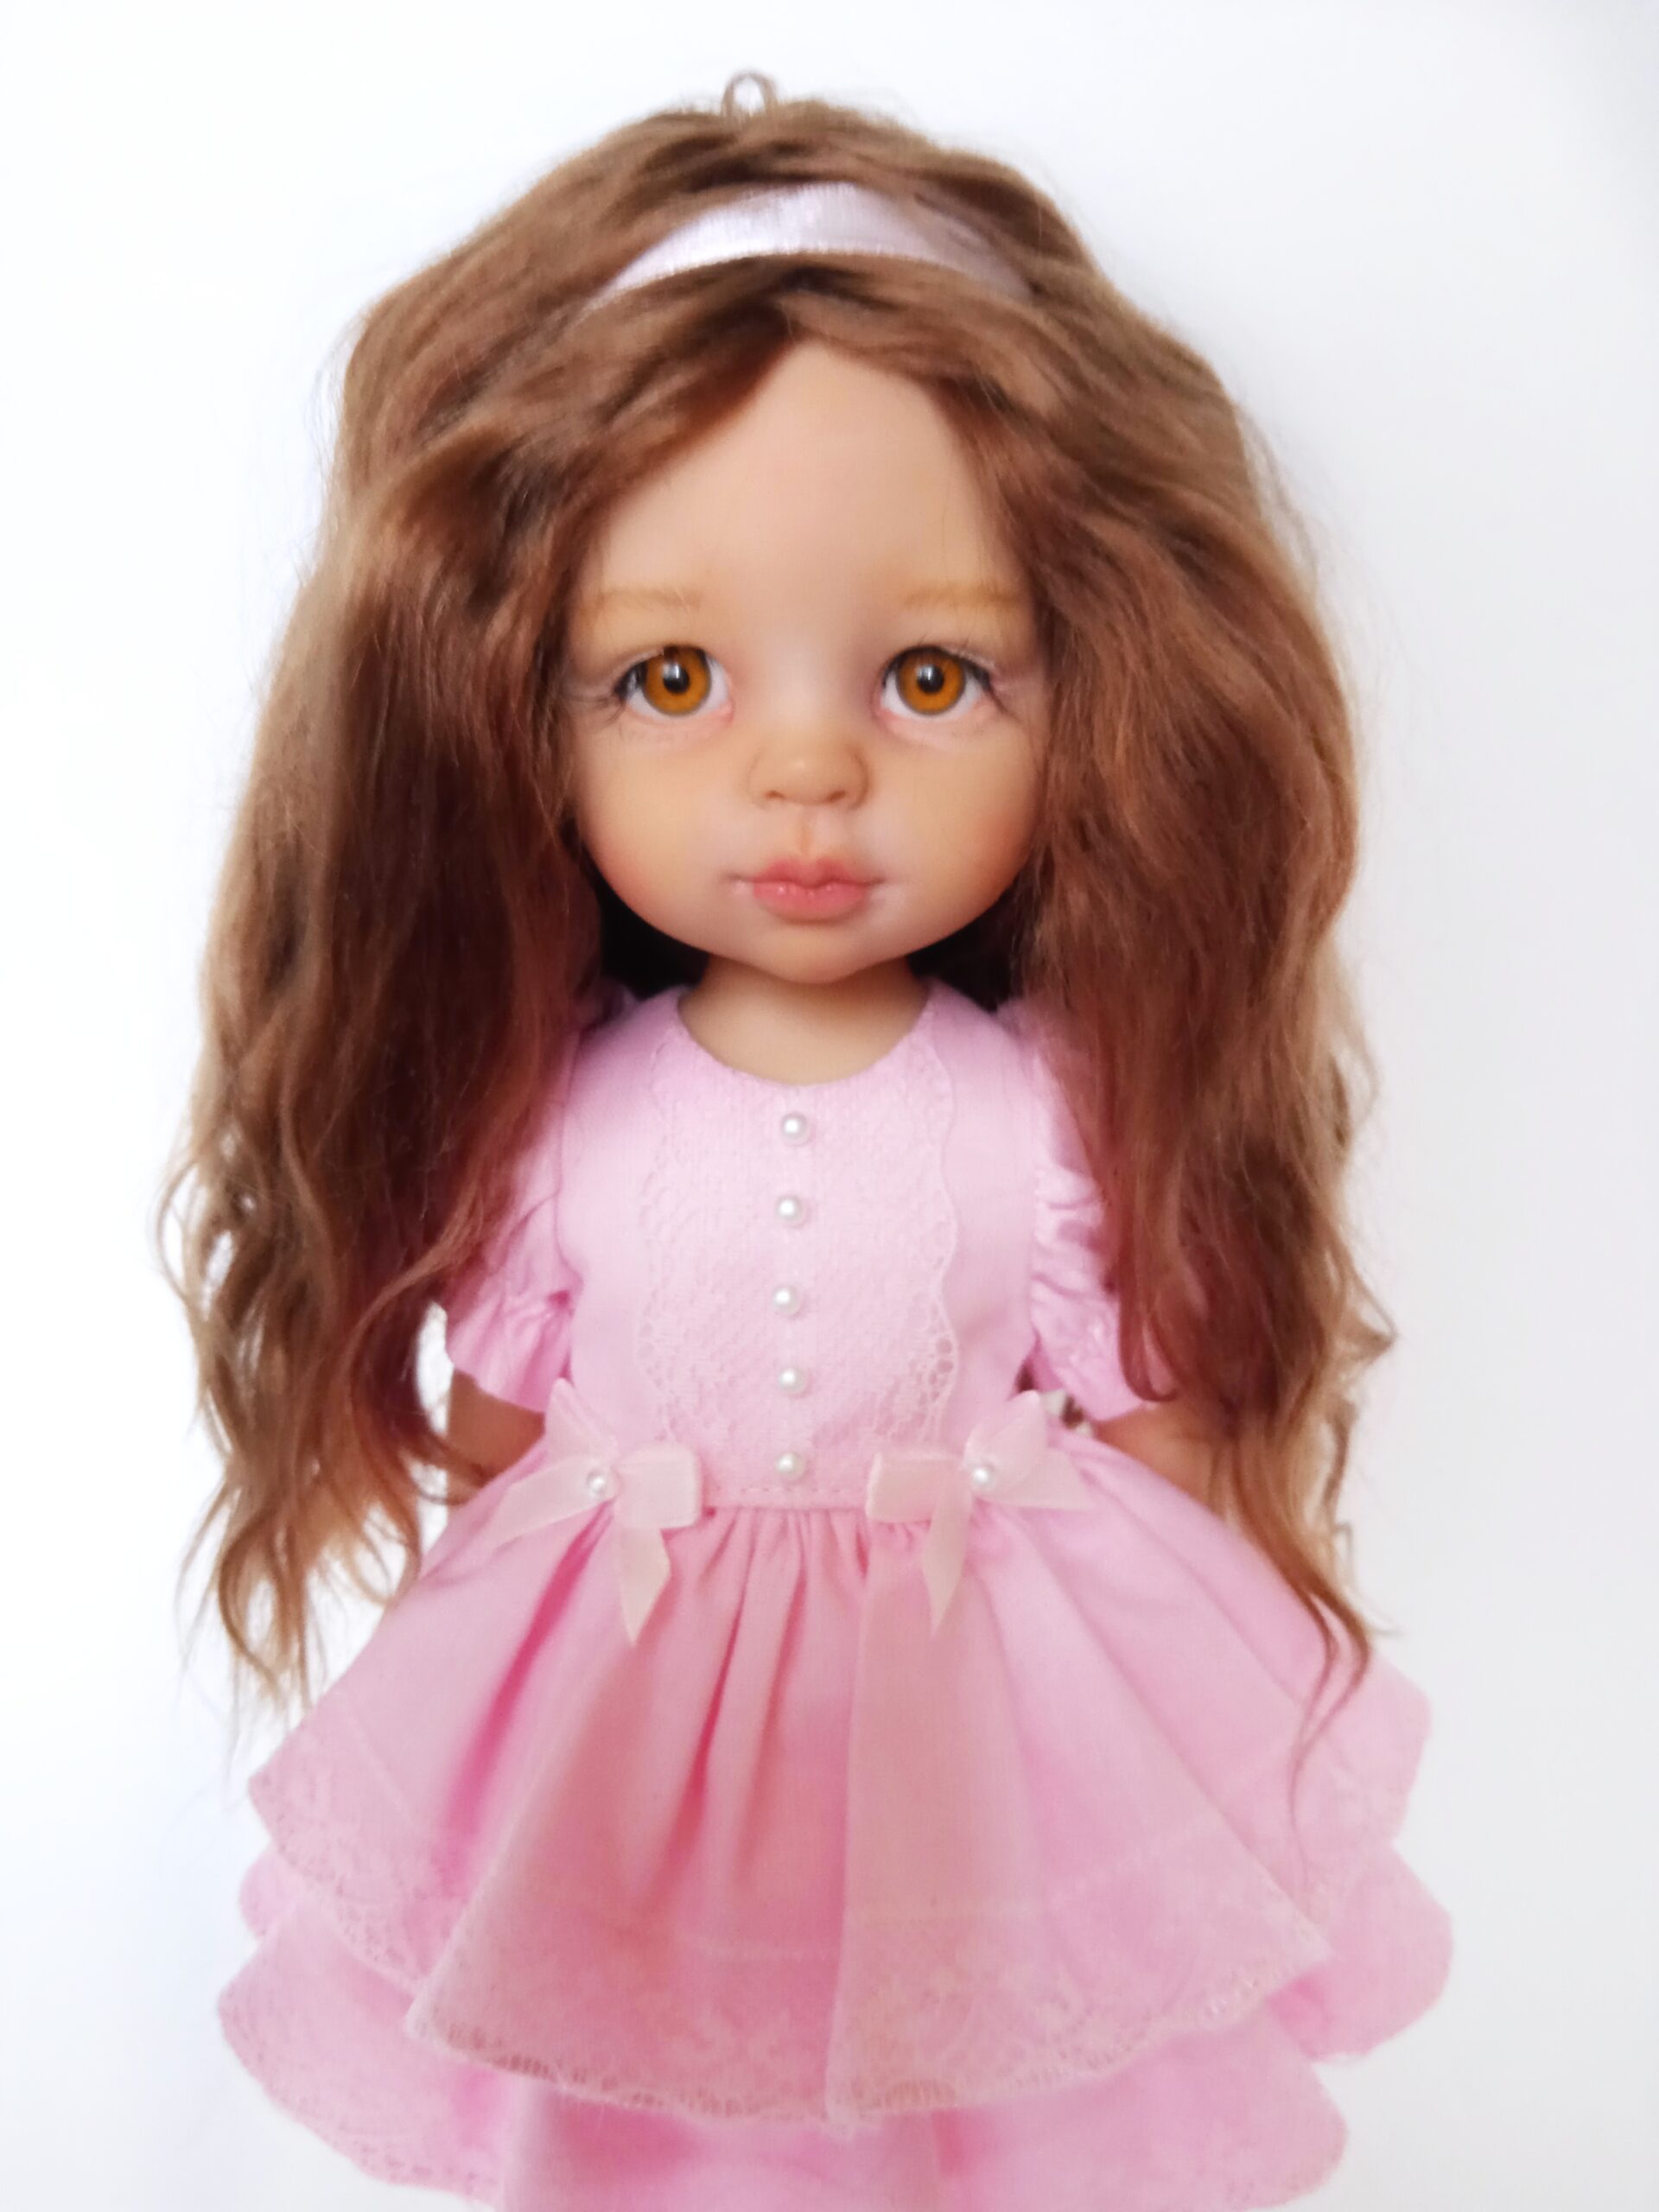 Sold out!!!OOAK Paola Reina,Author's unique doll, a gift for a